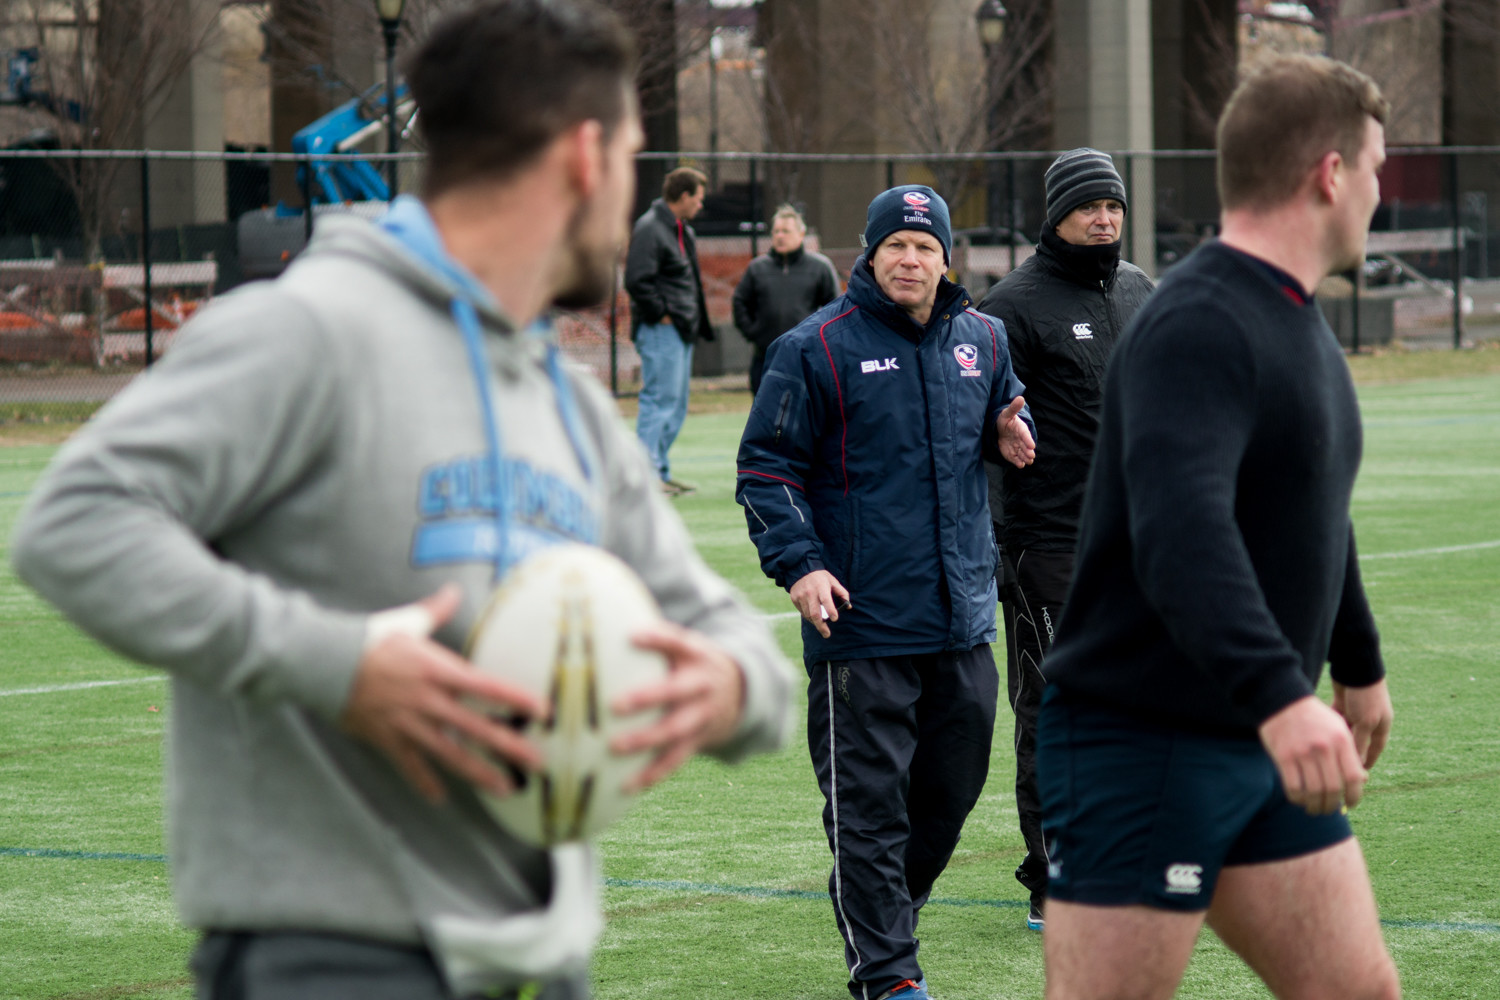 New Rugby New York head coach Mike Tolkin barks instructions to his new players at a recent practice in preparation for the team’s first exhibition schedule.